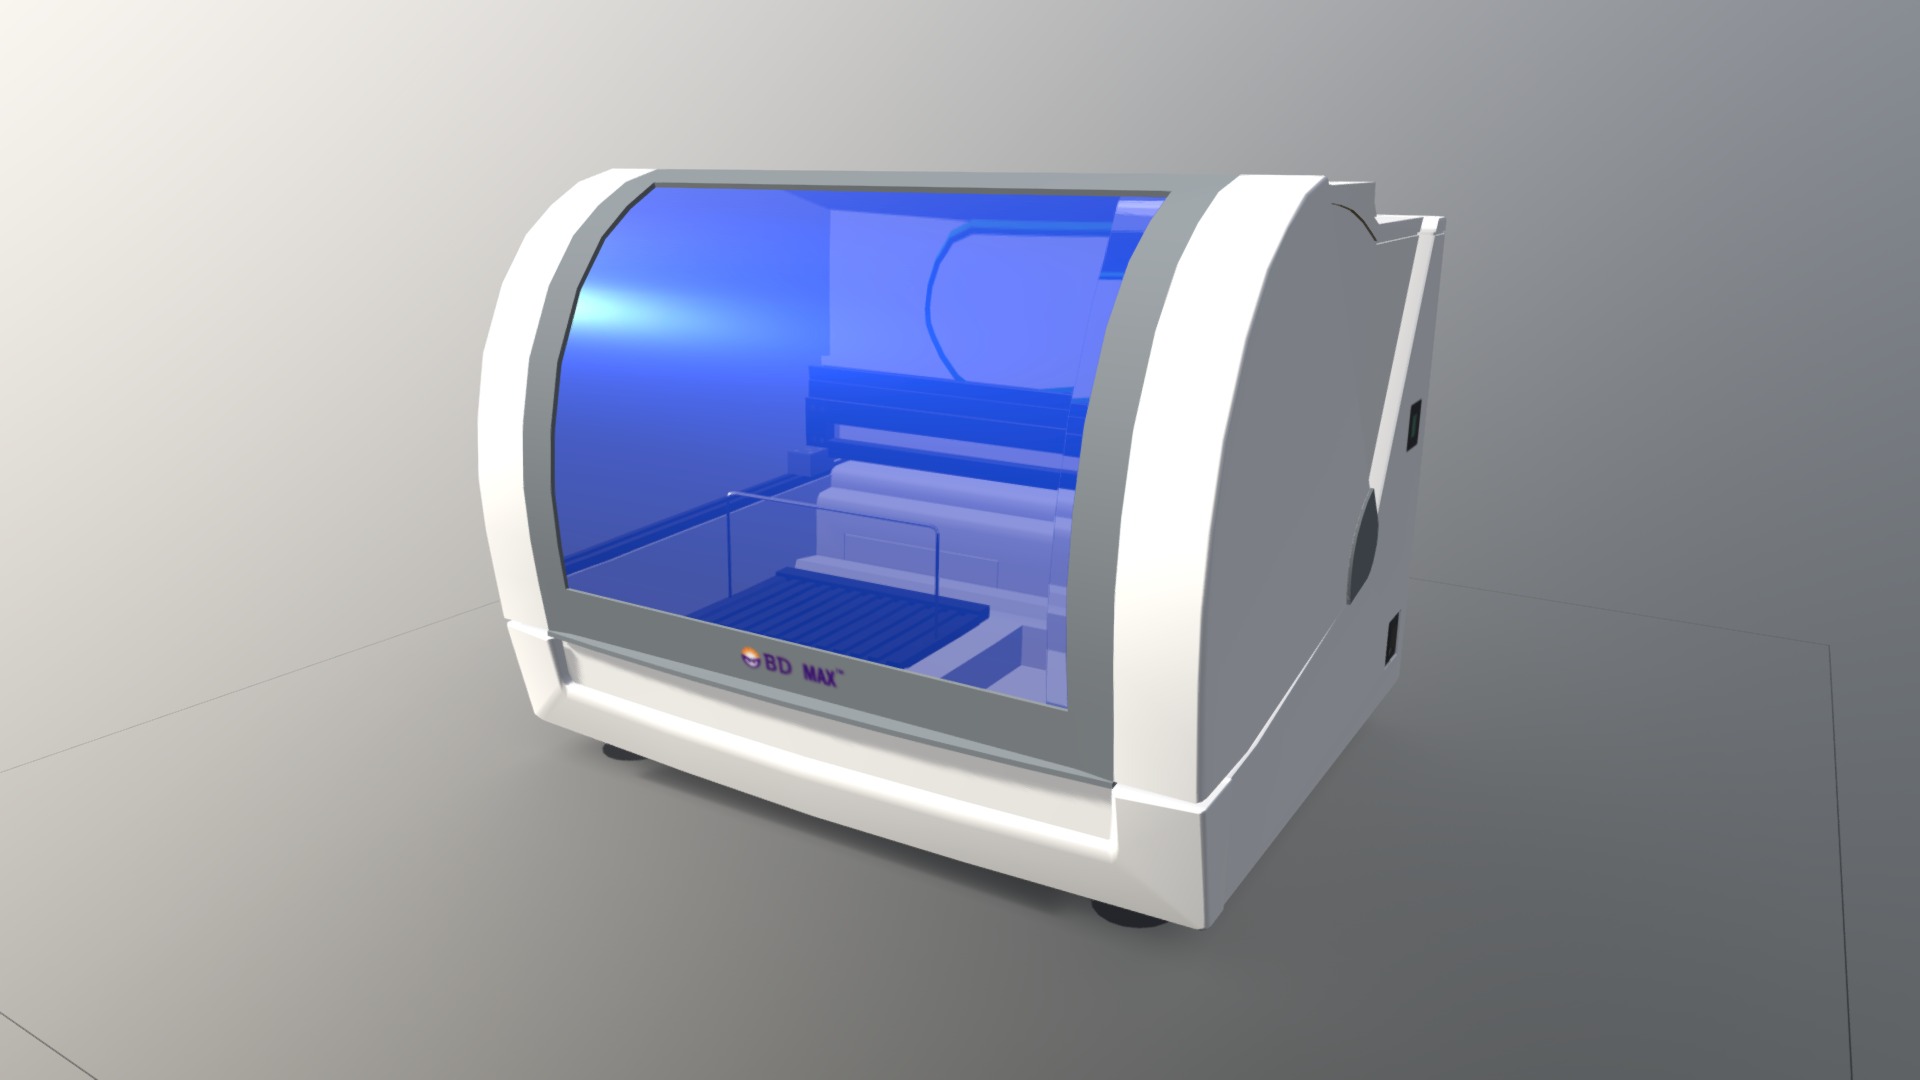 3D model BD Max - This is a 3D model of the BD Max. The 3D model is about a white rectangular object with a blue screen.